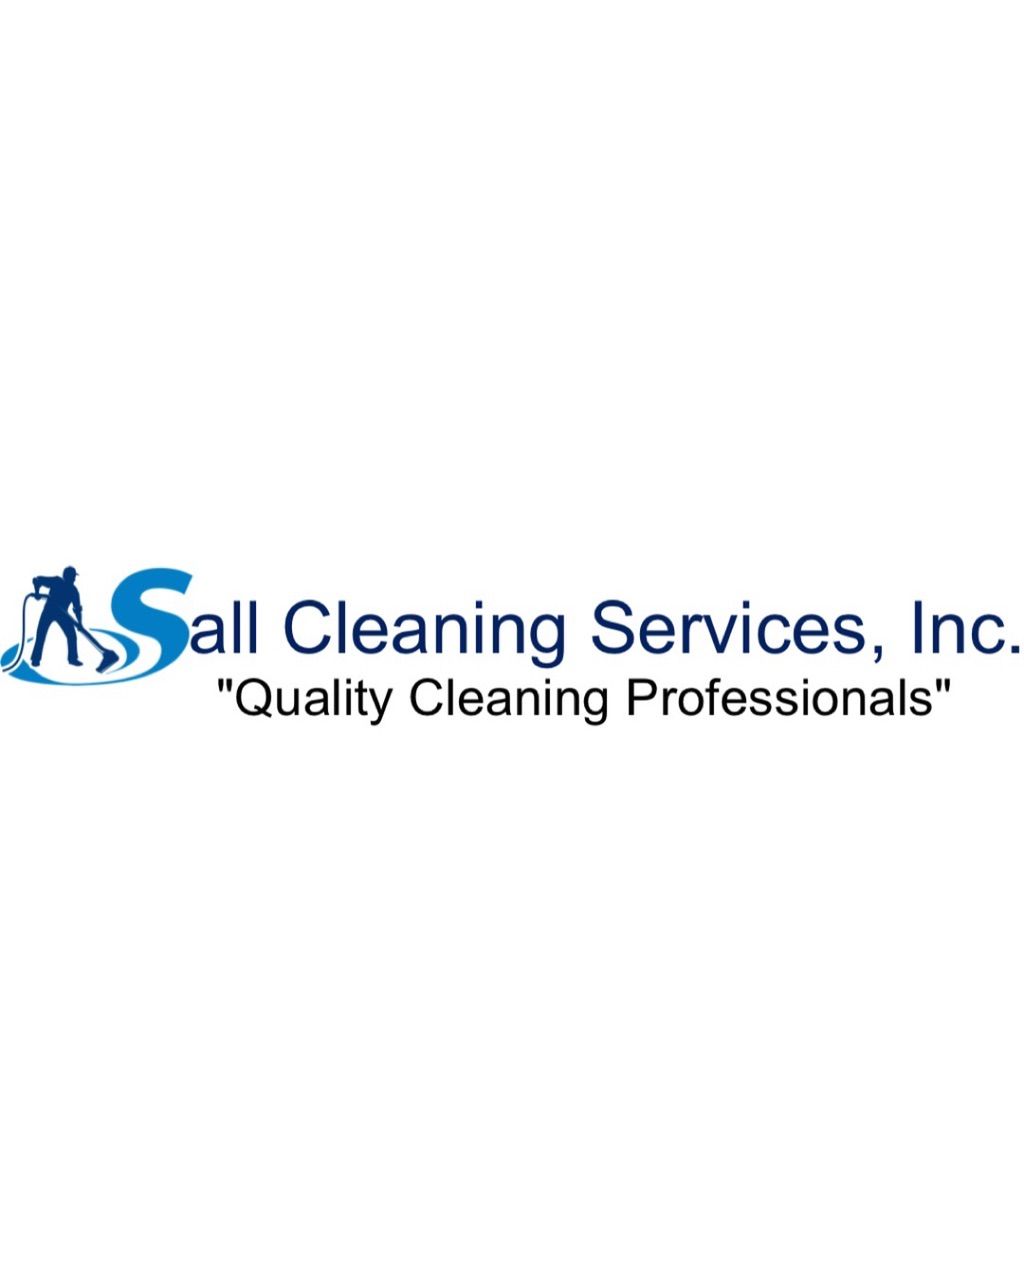 Sall Cleaning Services, Inc.